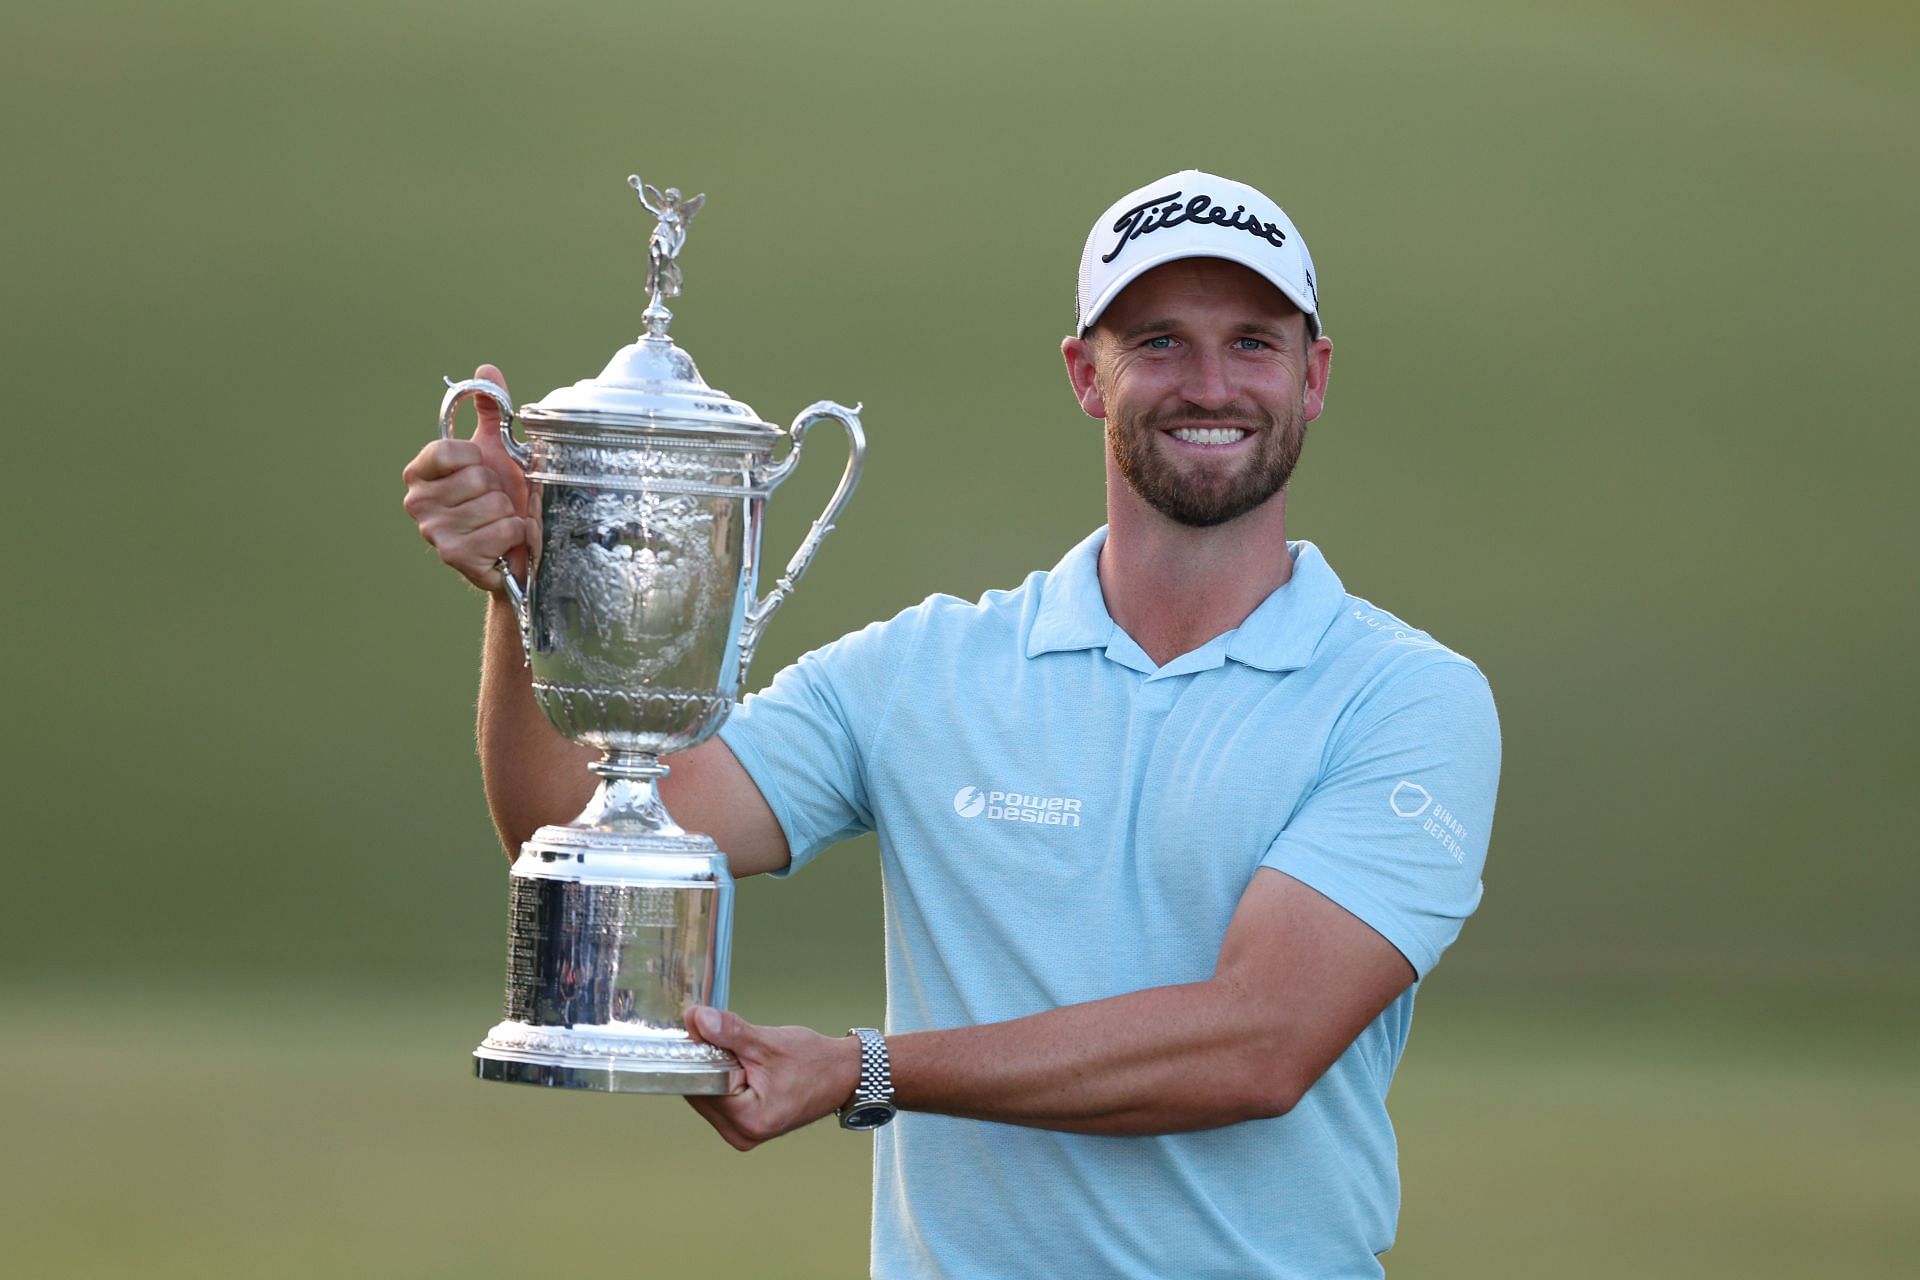 Wyndham Clark poses with the trophy after winning the 123rd U.S. Open Championship